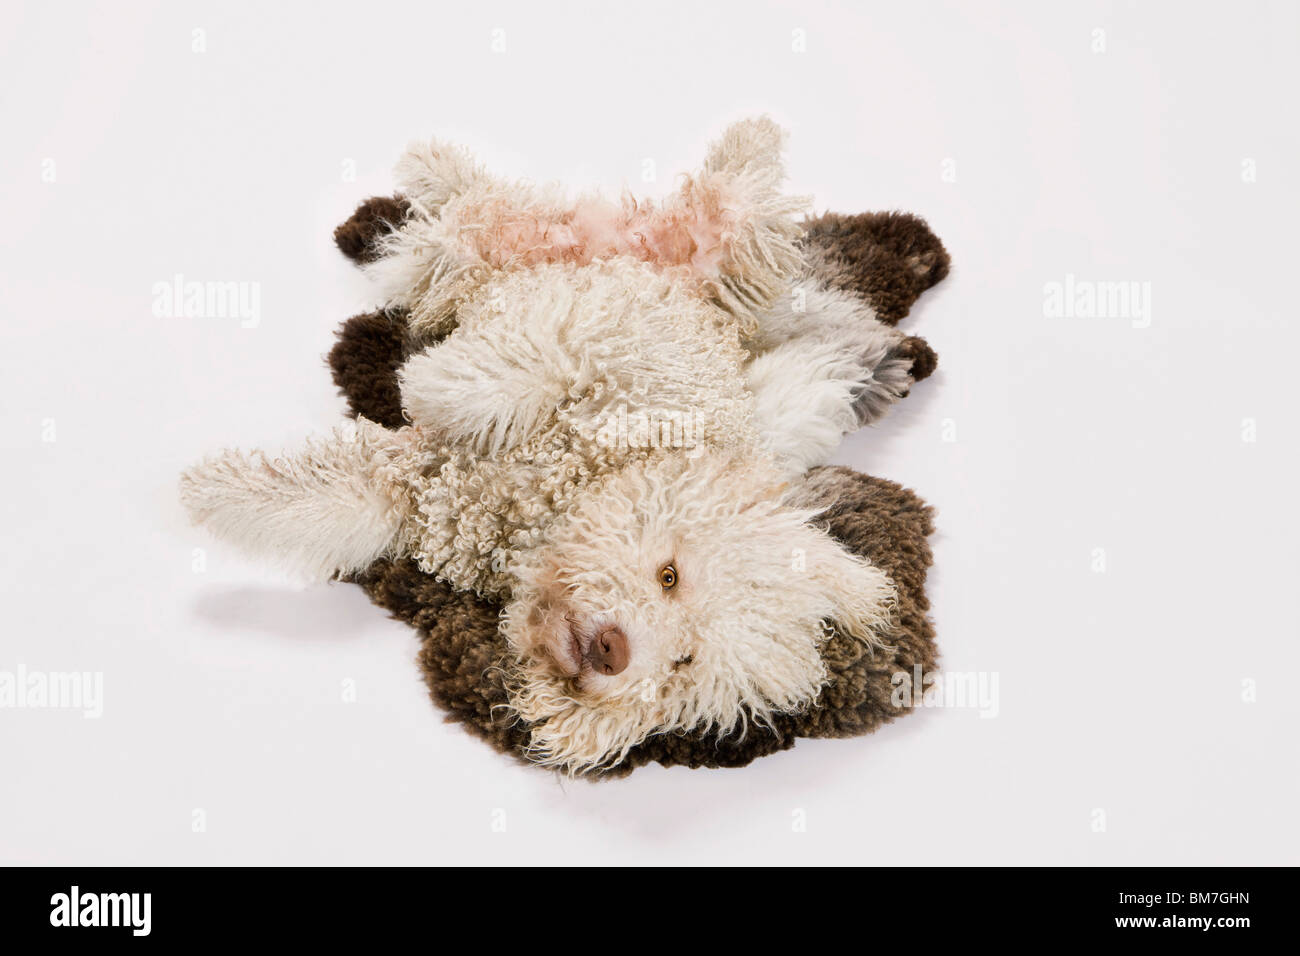 A Portuguese Waterdog rolling over on a sheepskin rug Stock Photo